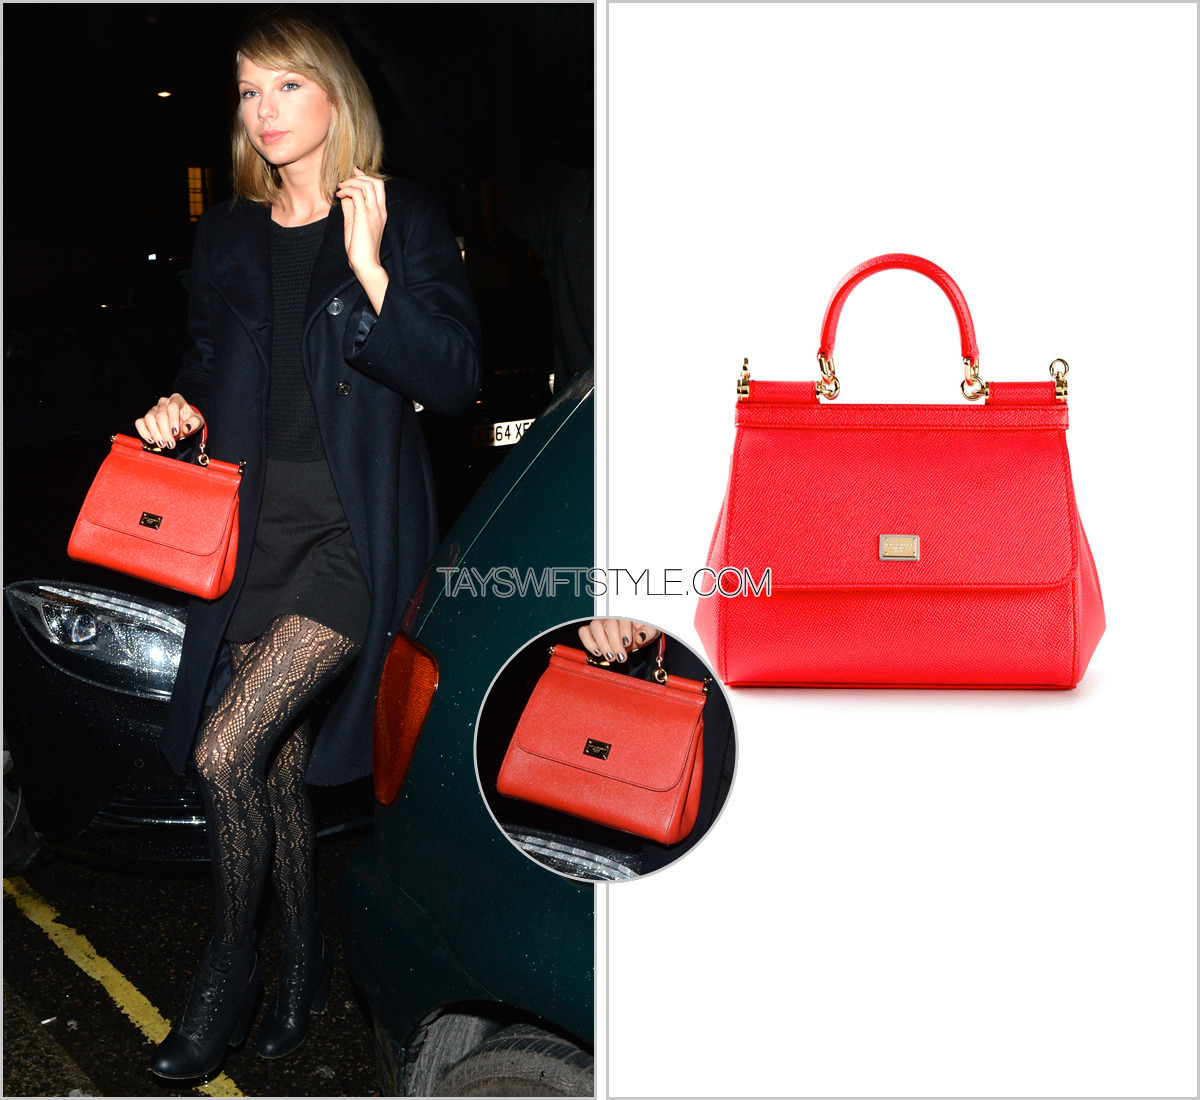 Taylor Swift and her Dolce & Gabbana bag: A love story